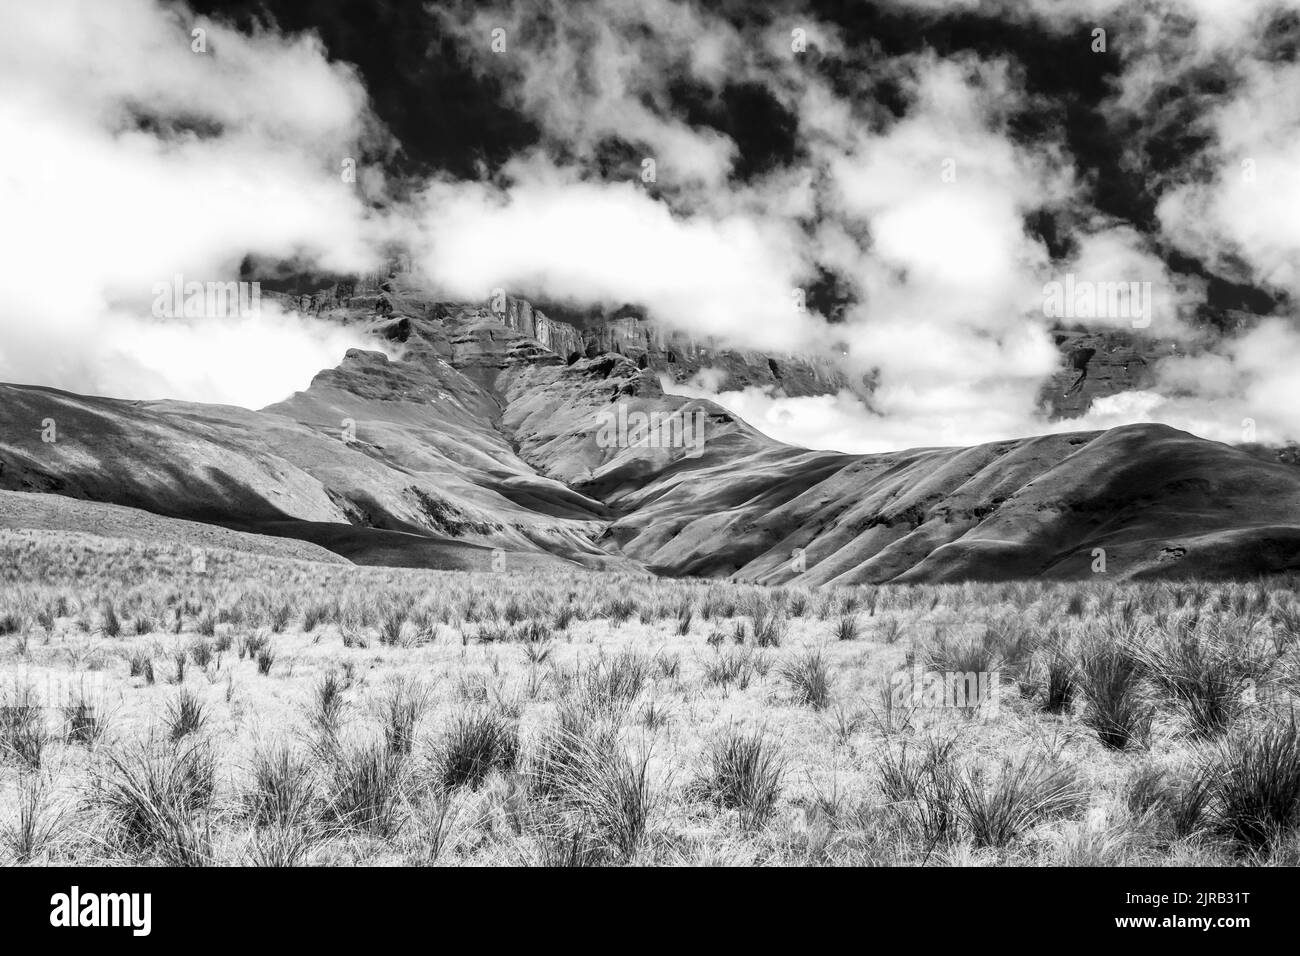 The Afro-alpine Grassland of the Drakensberg Mountains in Black and white with the basalt cliffs obscured by clouds rising ominously in the background Stock Photo